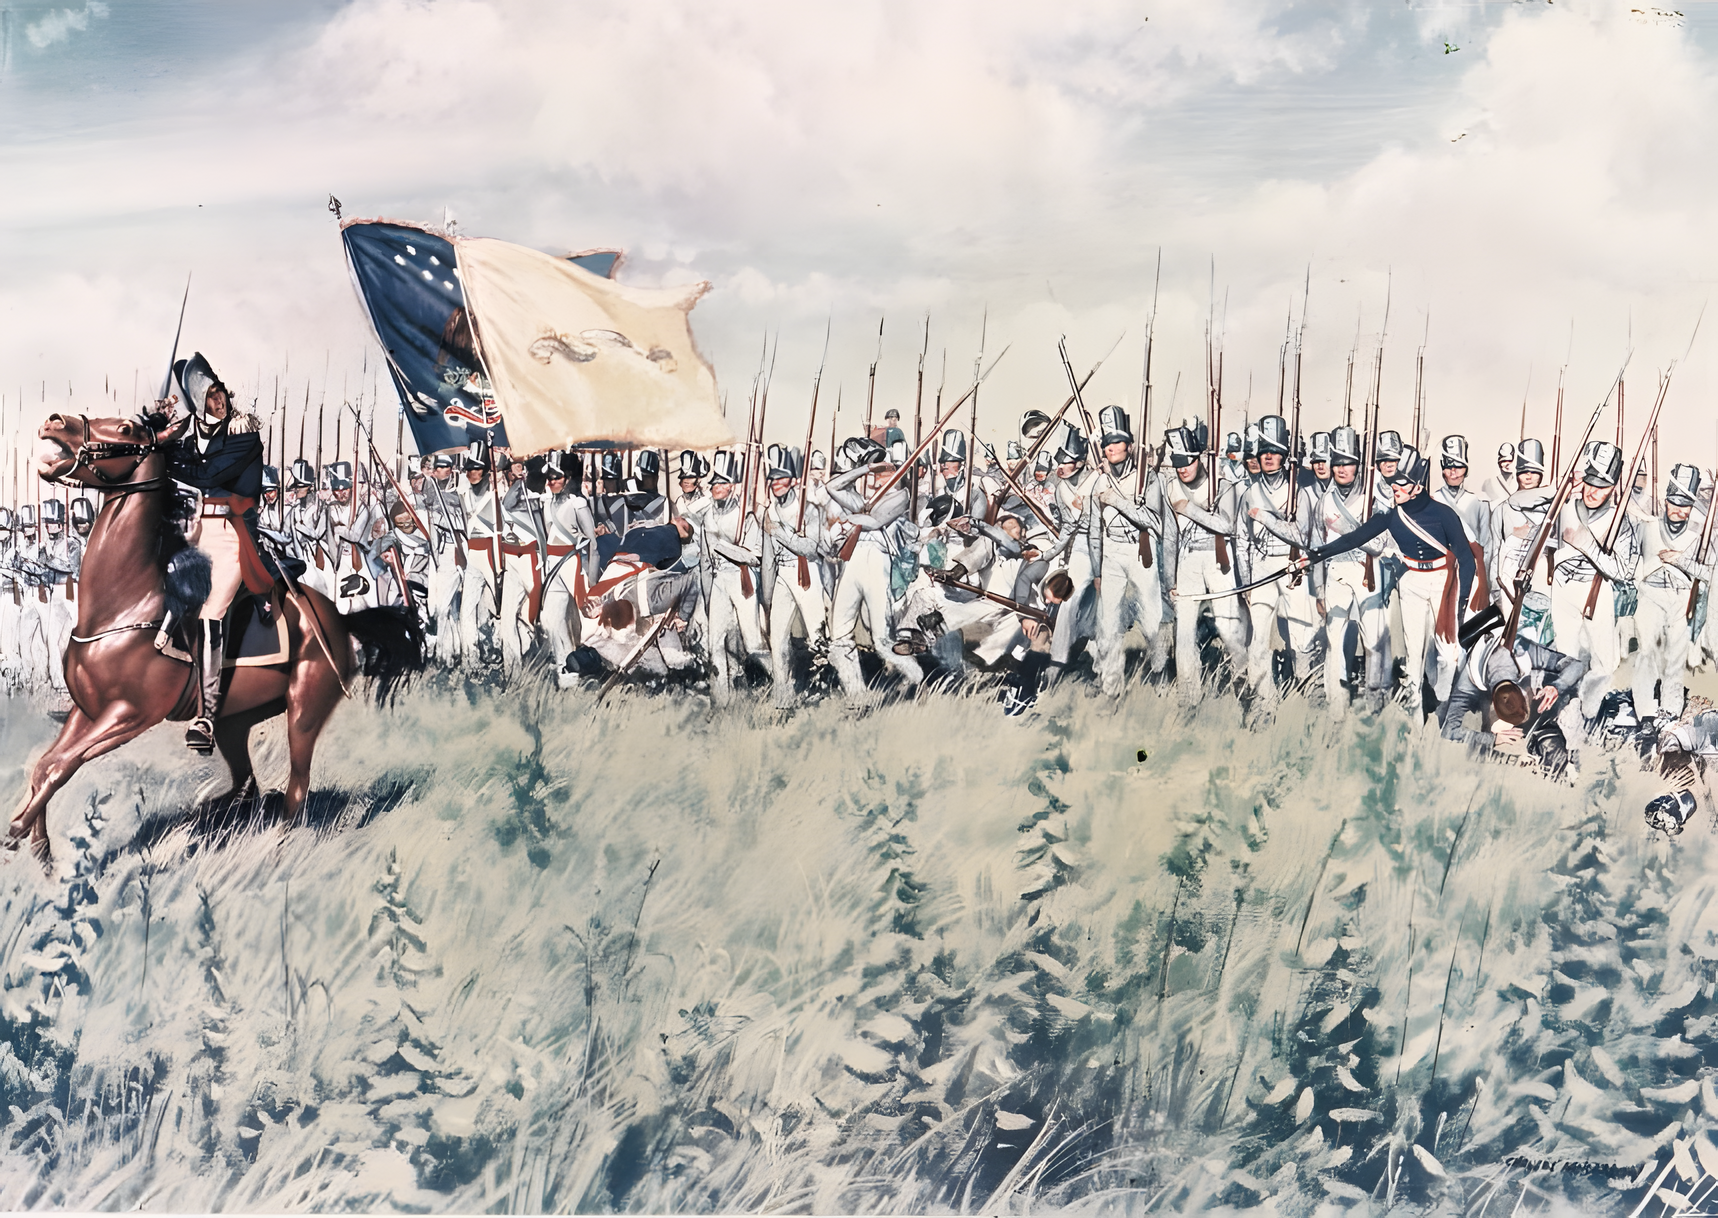 Brig. Gen. Winfield Scott's line of infantry, dressed in short, gray jackets because not enough blue ones were available, advanced boldly upon the enemy at an early battle near the Chippawa River.